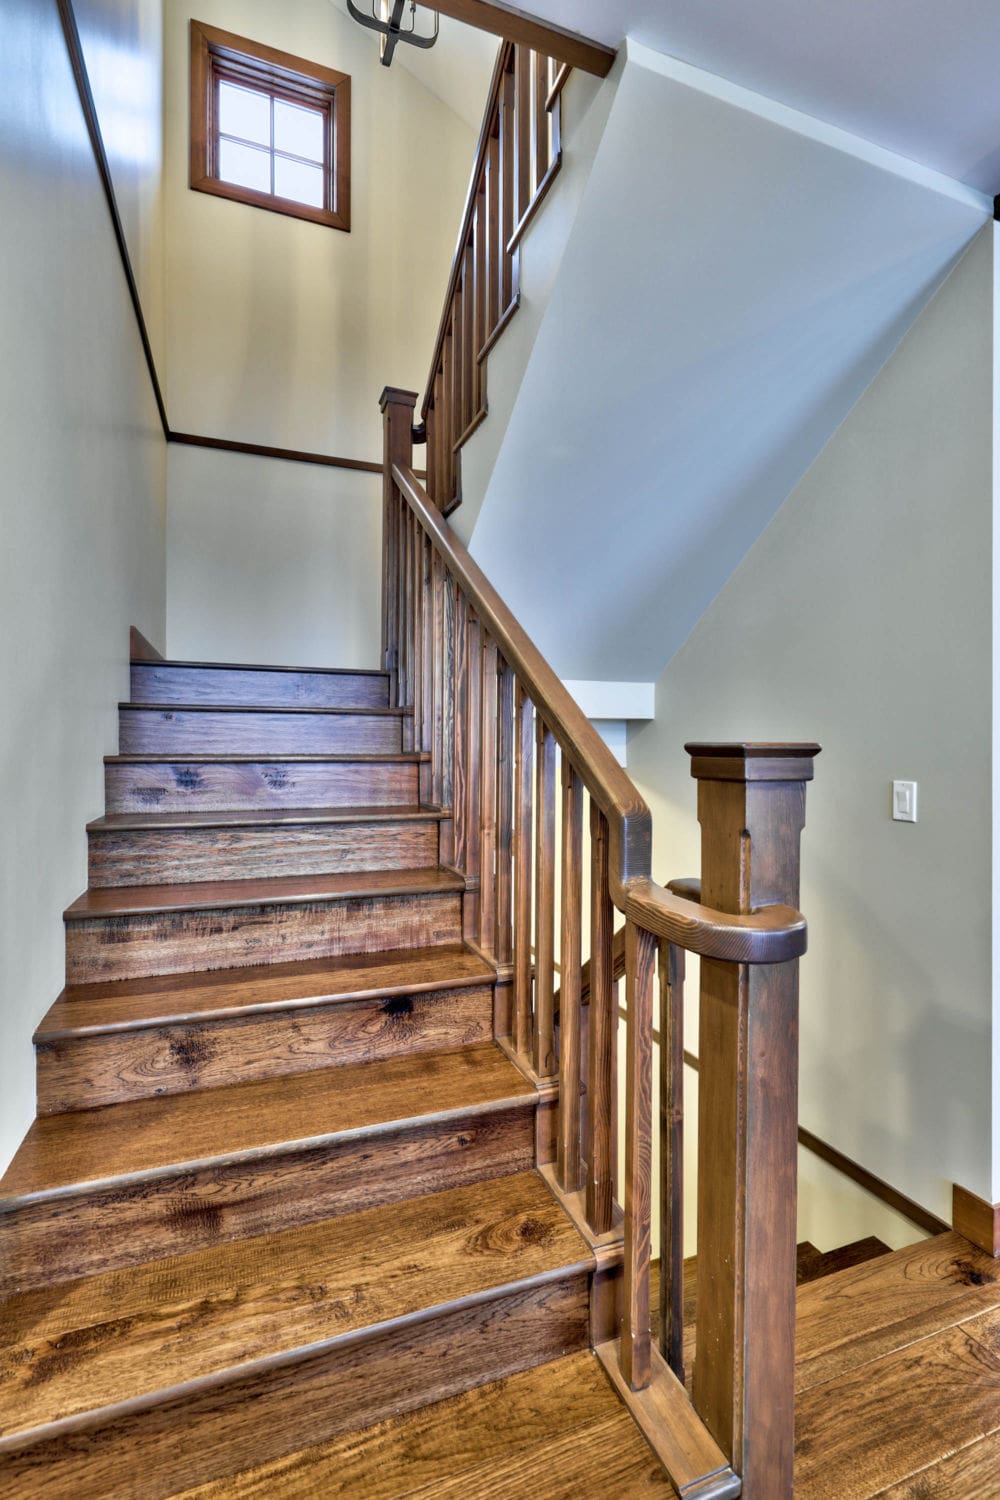 Staircase heading upstairs in a timber frame log home